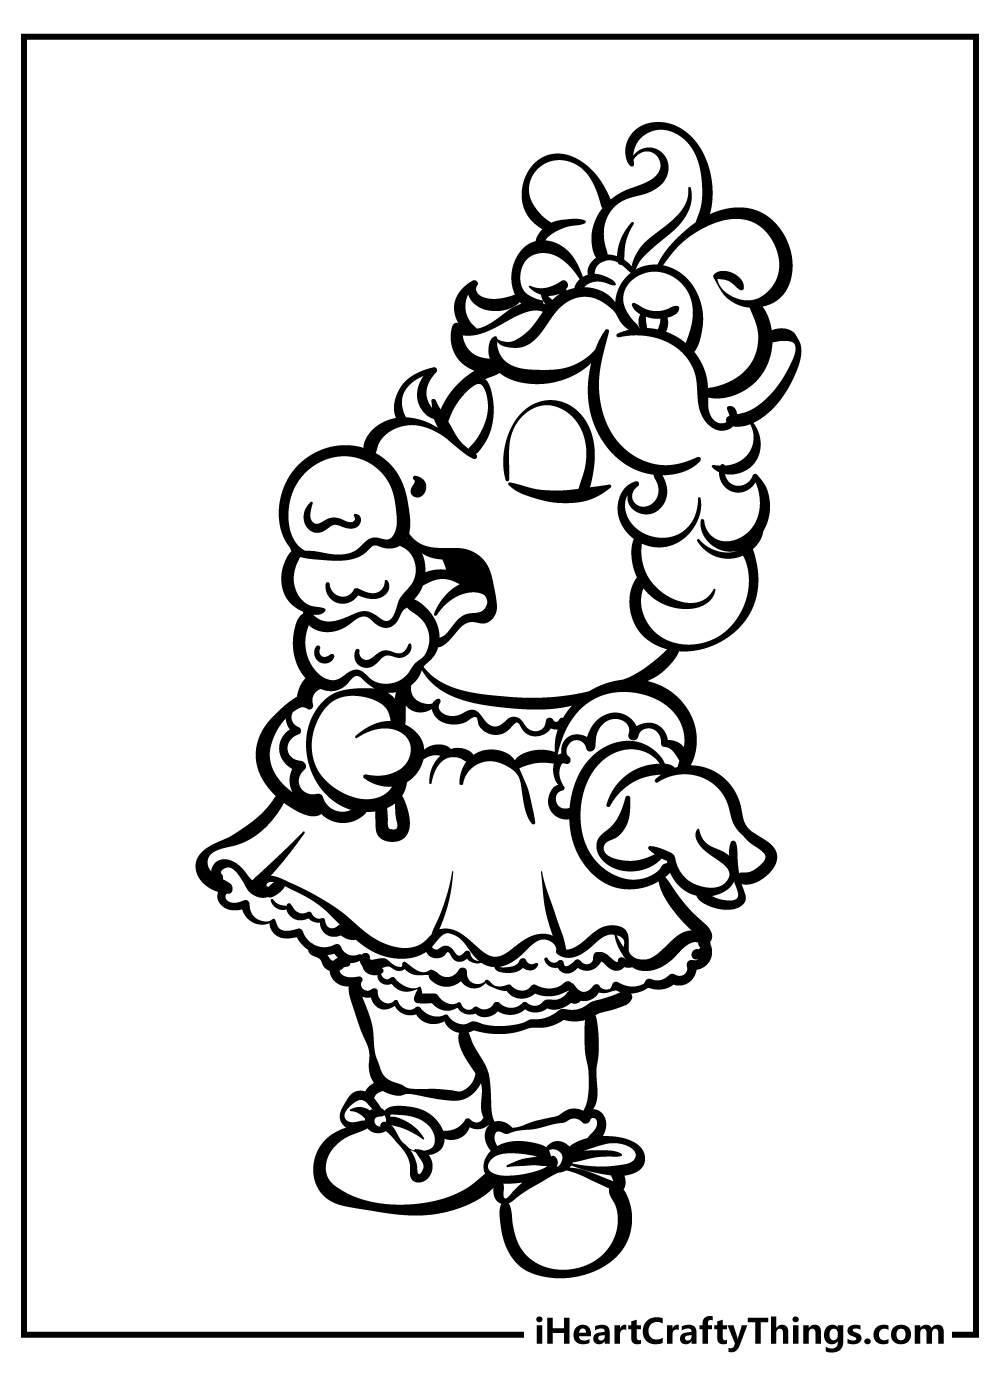 Muppet Babies Coloring Pages for adults free printable